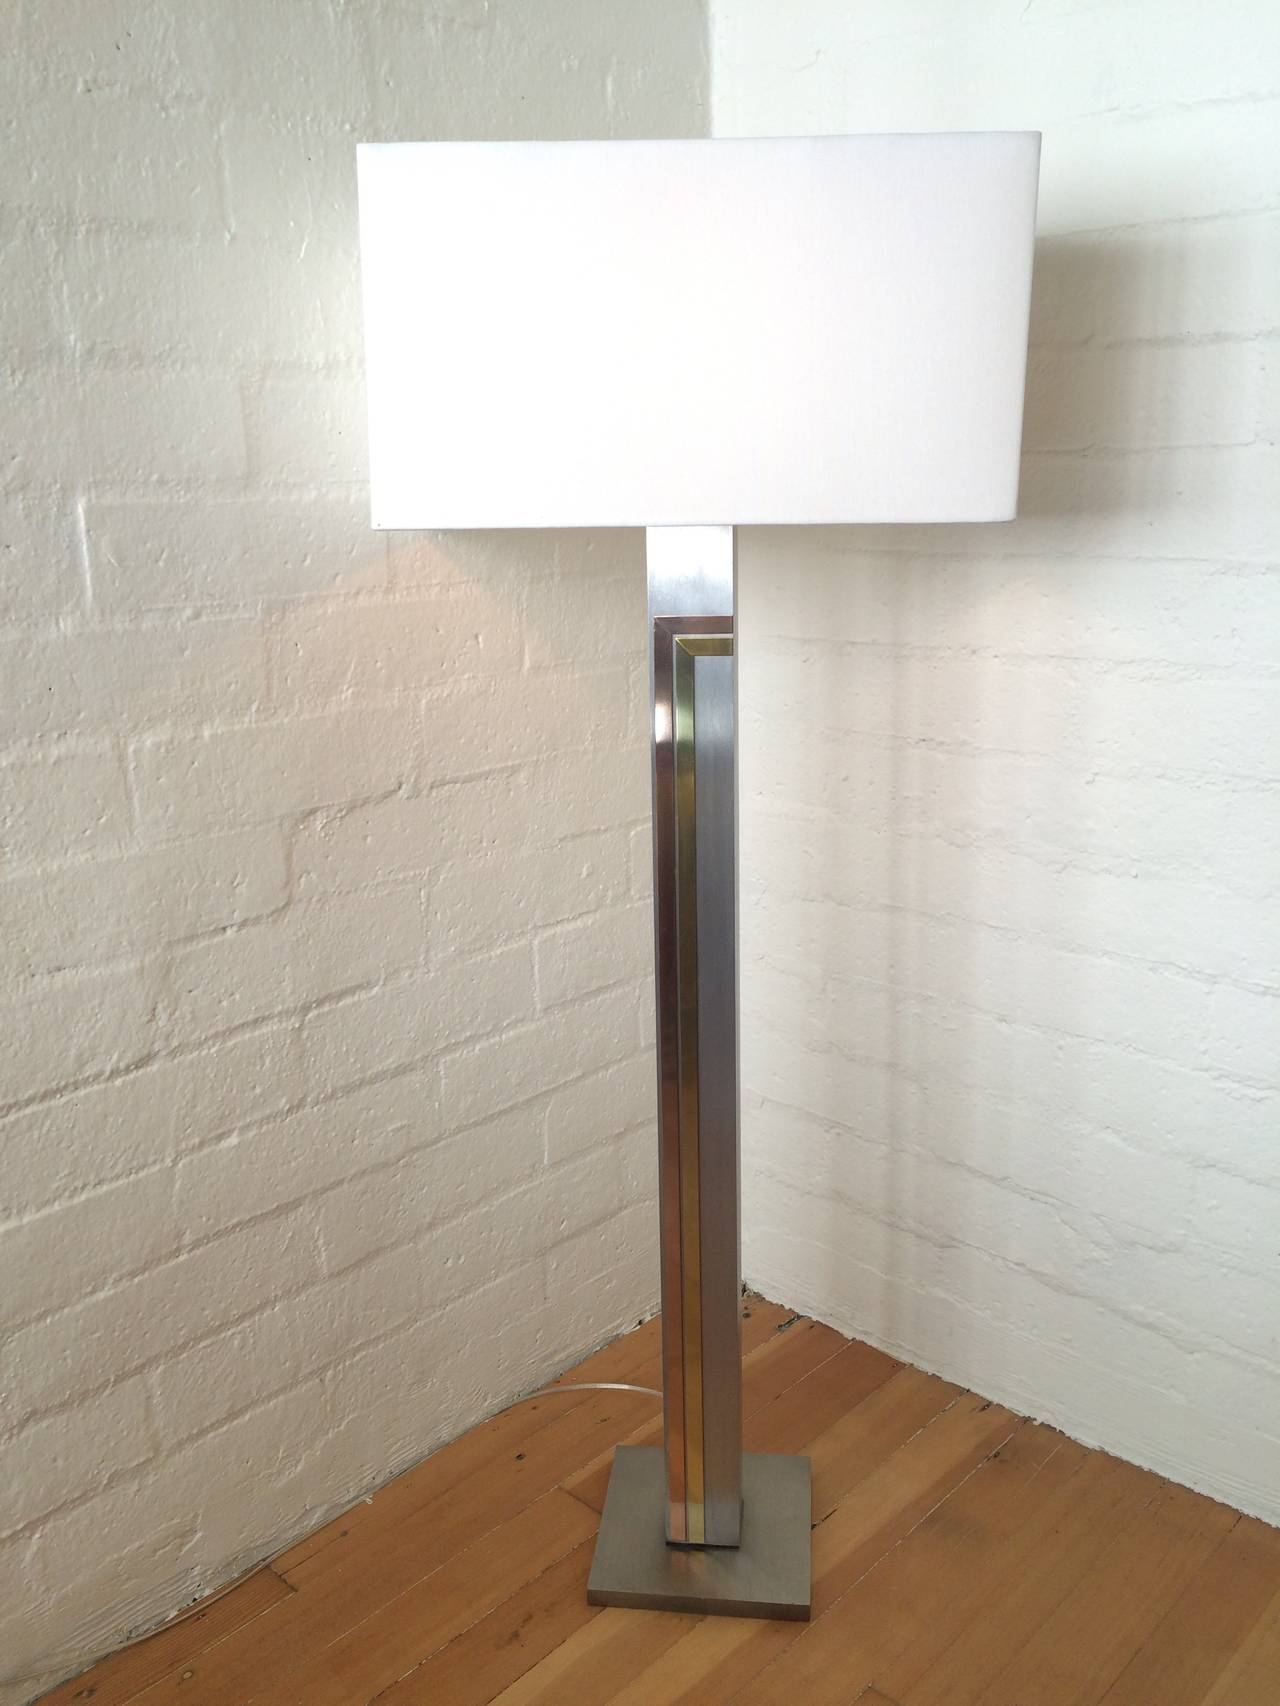 A brushed steel with brass and copper accents floor lamp designed by Pierre Cardin and made by Laurel Co. 
Newly rewired and new shade.